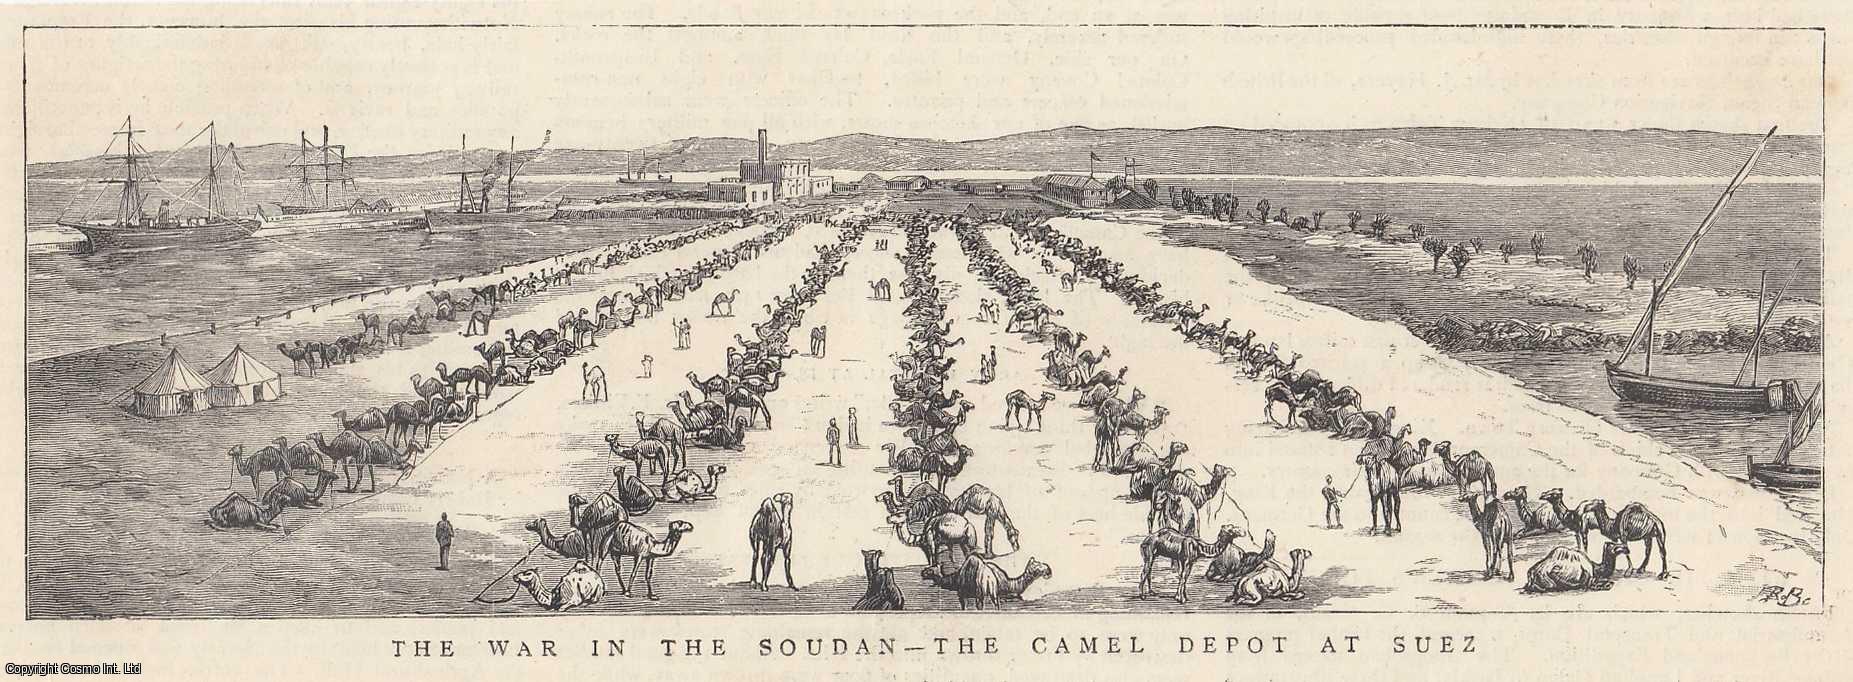 Camels - Mahdist War. The Camel Depot at Suez. The War in the Soudan. An original print from the Graphic Illustrated Weekly Magazine, 1885.